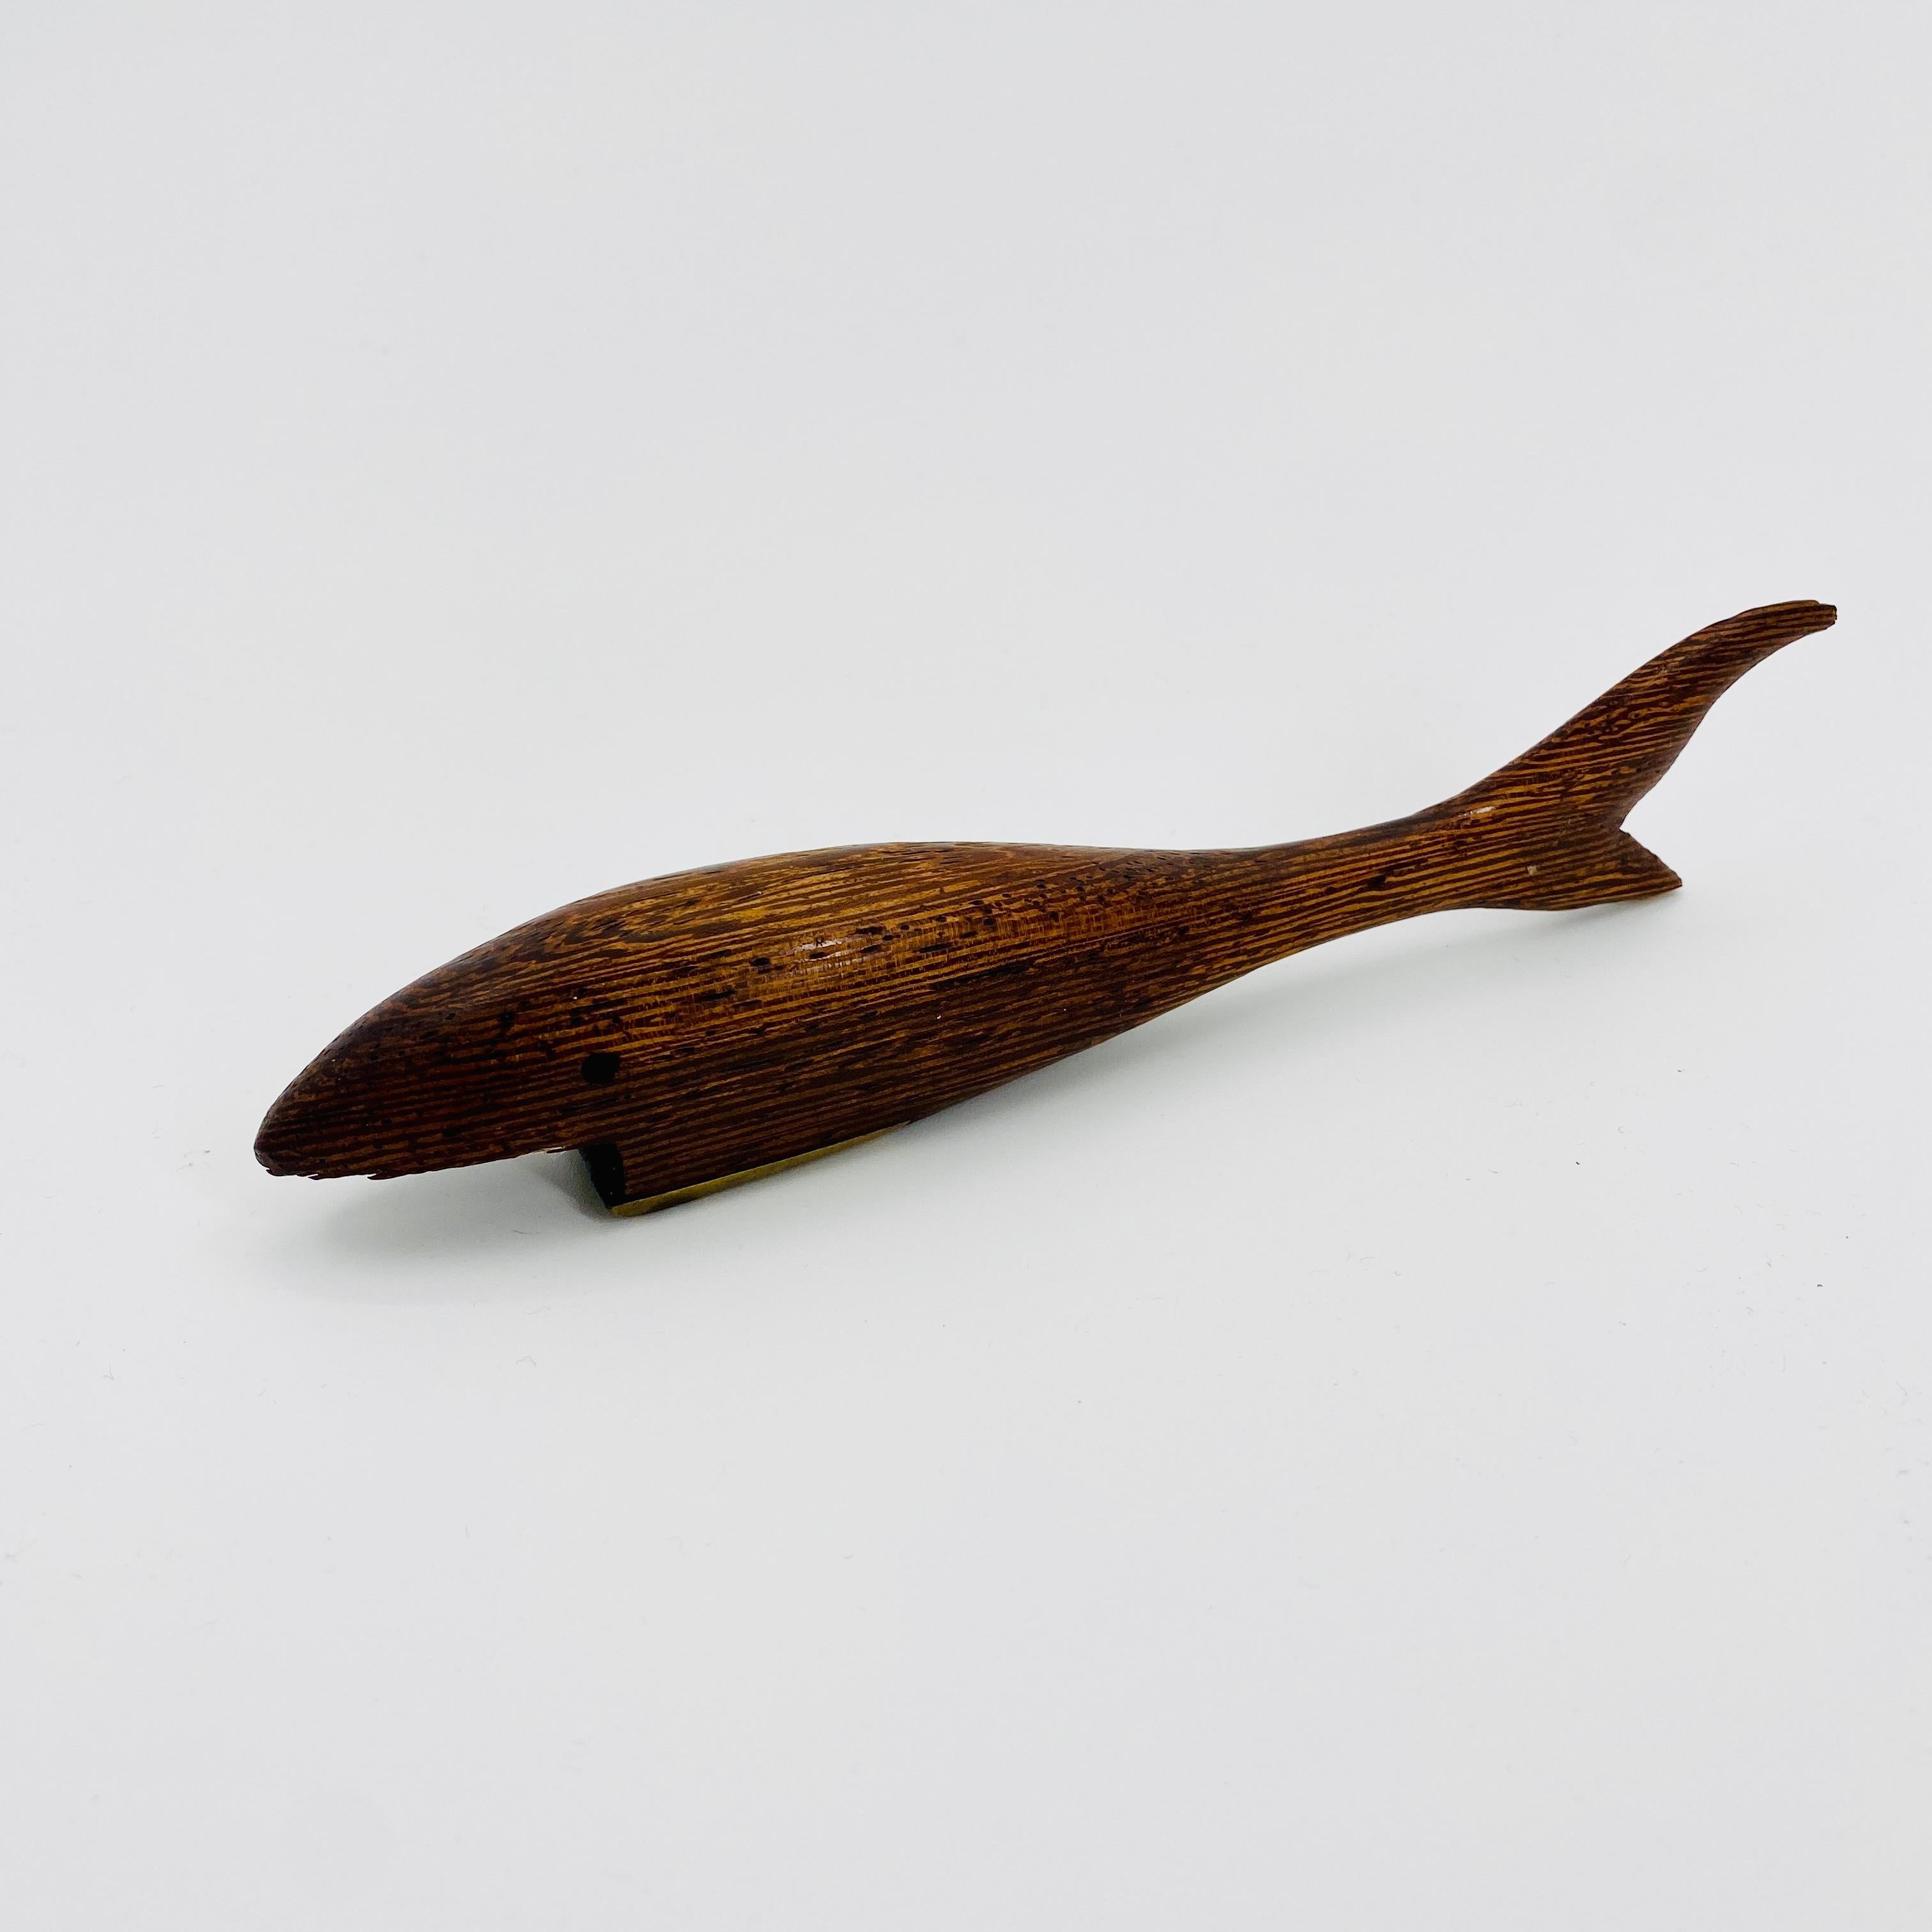 Scandinavian modern oak and brass fish shaped bottle opener

Danish Arts and Crafts bottle opener formed as a shark made in brass and oak wood. Then bottle opener feels very smooth and rests well in your hand. It is handcrafted and the oak has an